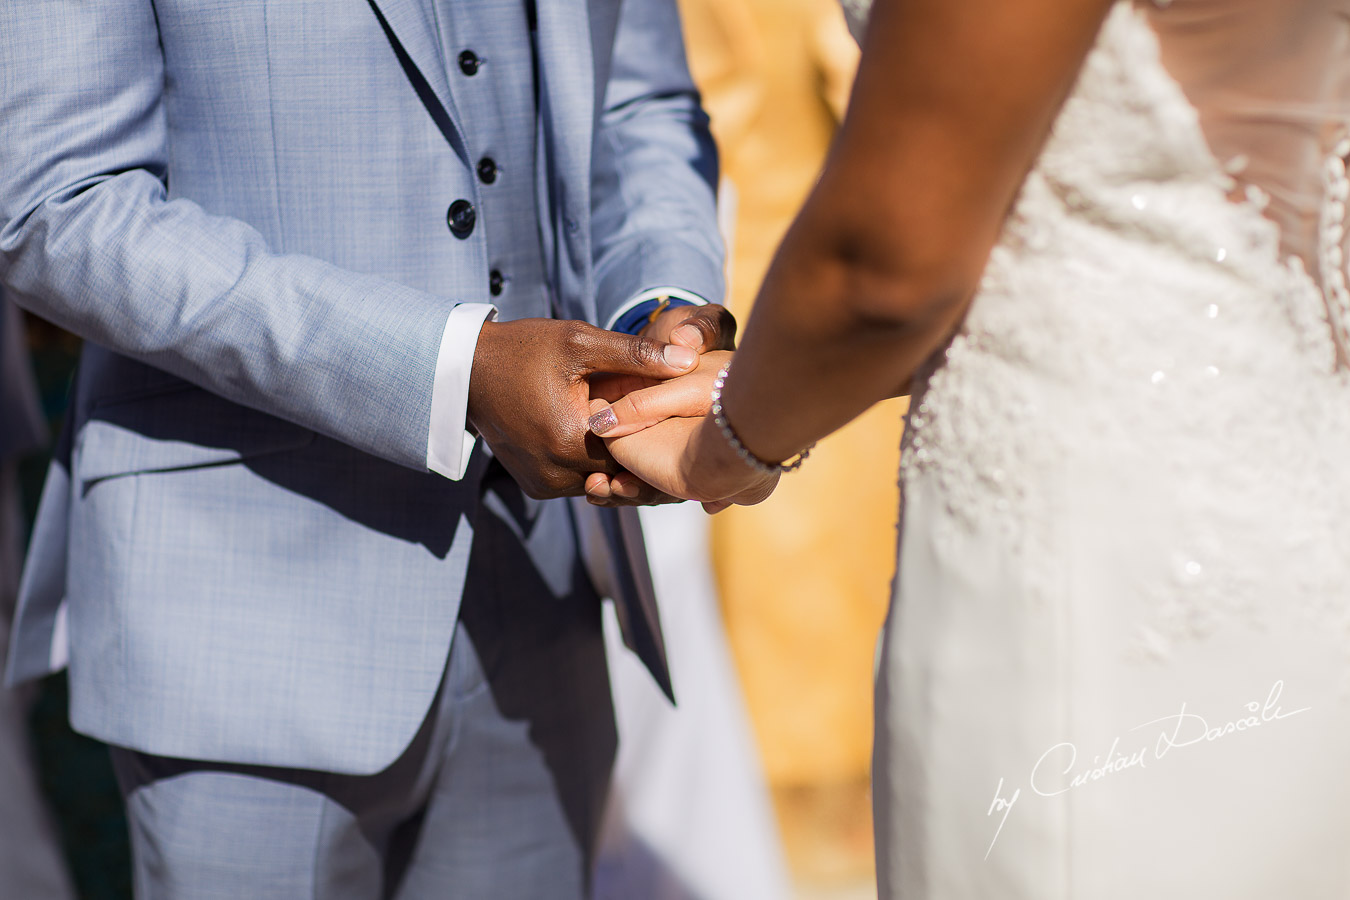 Moments and the bride and the groom are holding hands captured at a wedding at Minthis Hills in Cyprus, by Cristian Dascalu.